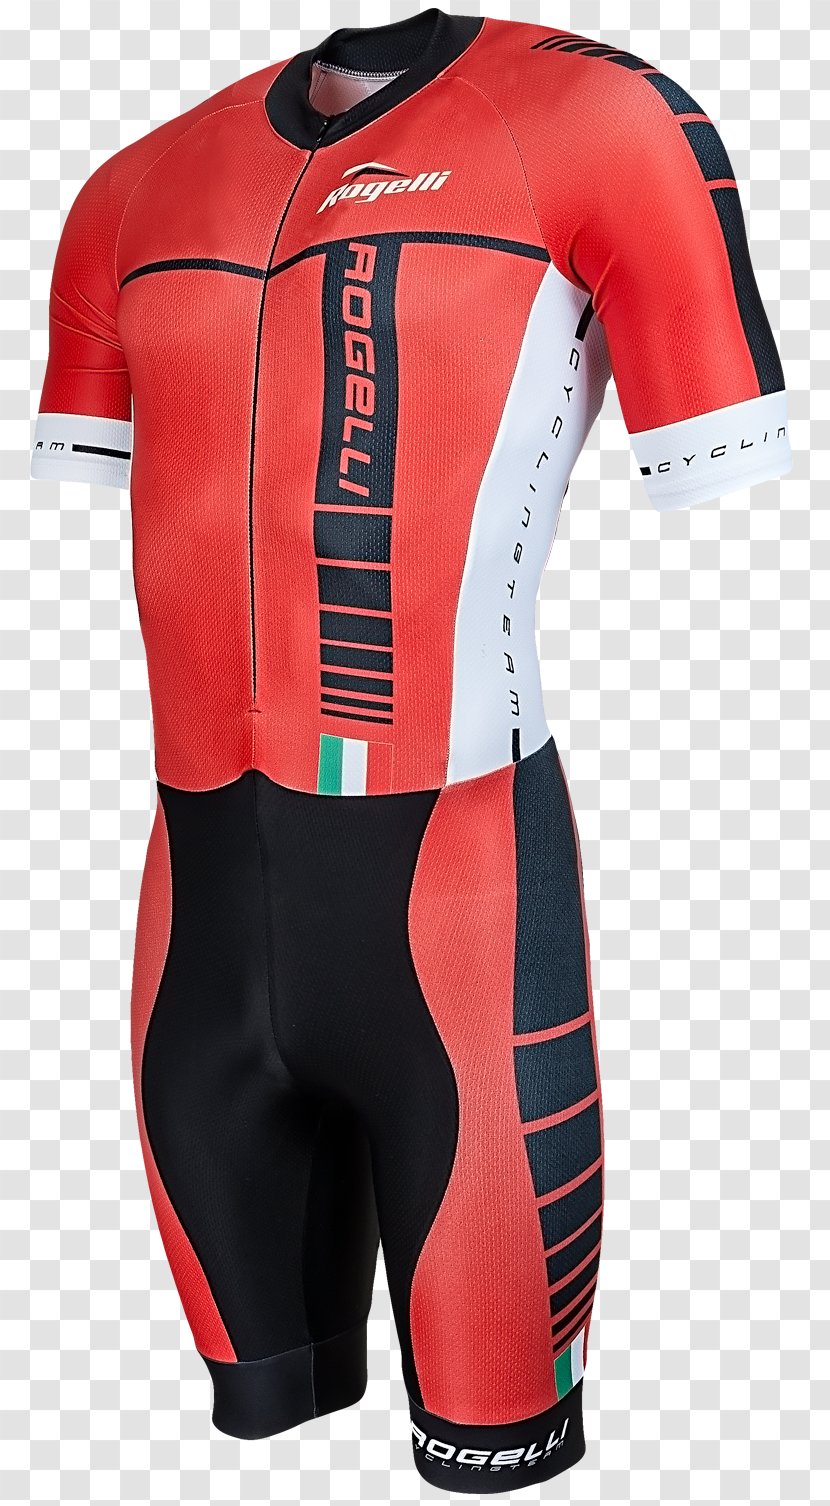 Spandex Clothing Sleeve Wetsuit Motorcycle - Heart - Frame Transparent PNG